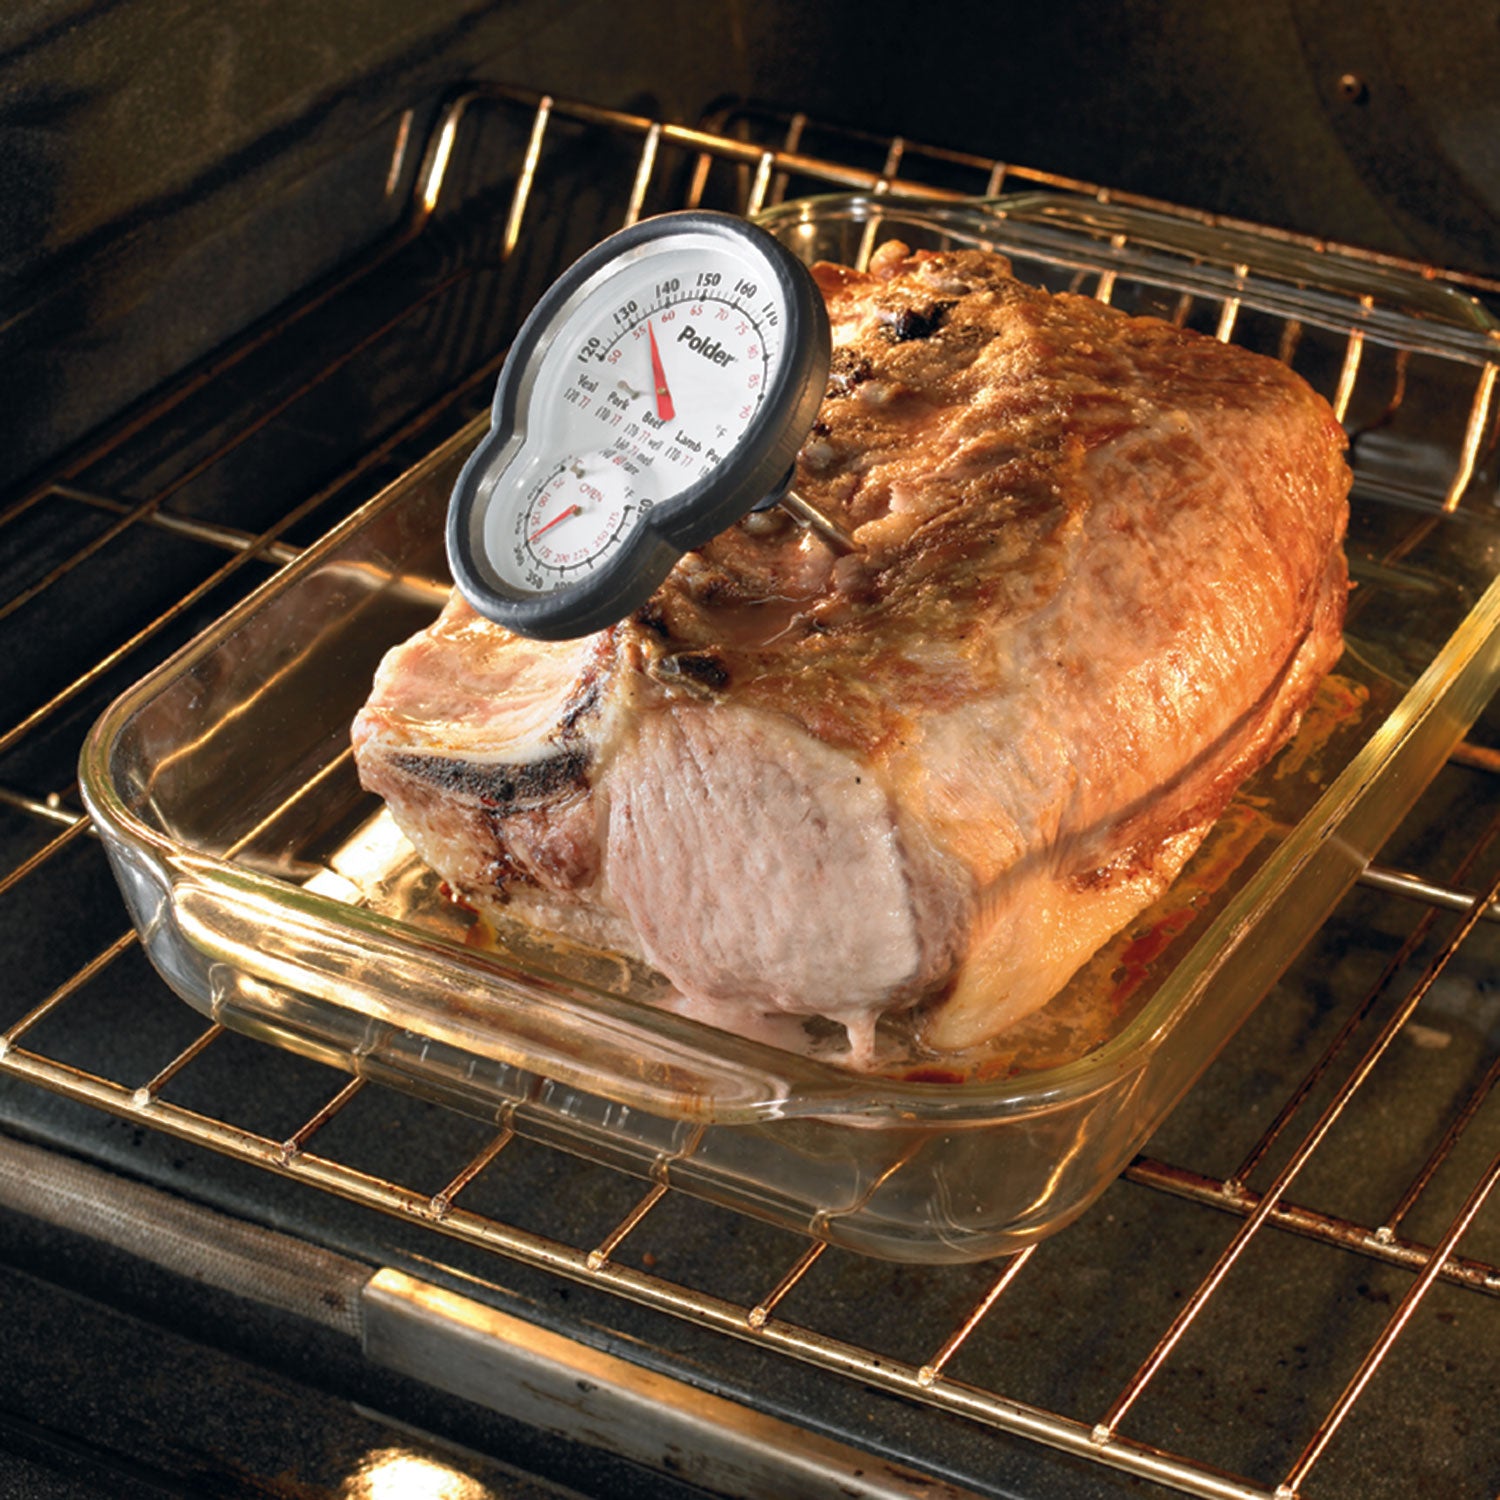 Polder Dual Sensor Oven & Meat Thermometer